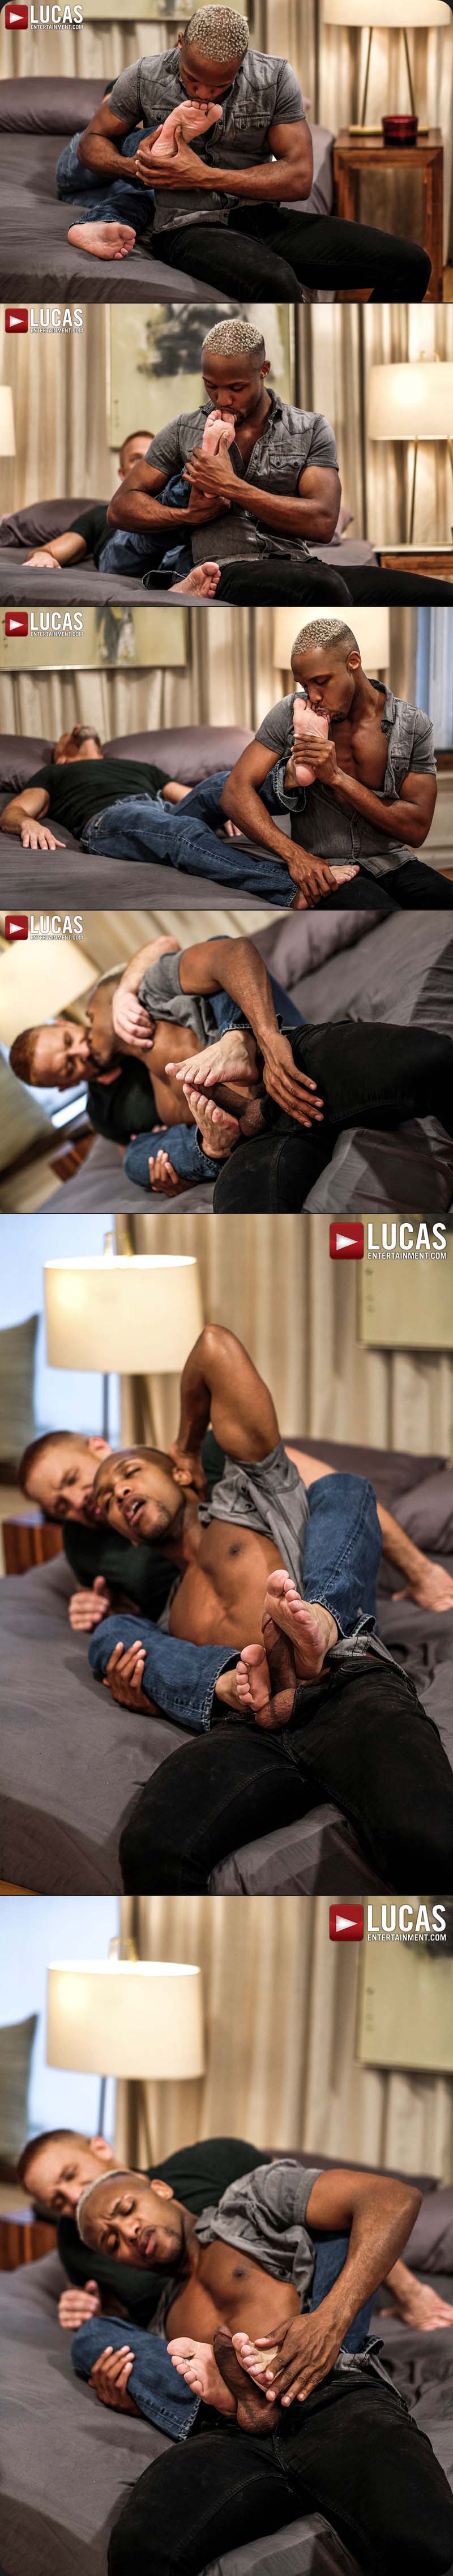 Raw Anal Sluts, Scene Two (Andre Donovan Tops Muscle-Bear Dirk Caber) at Lucas Entertainment